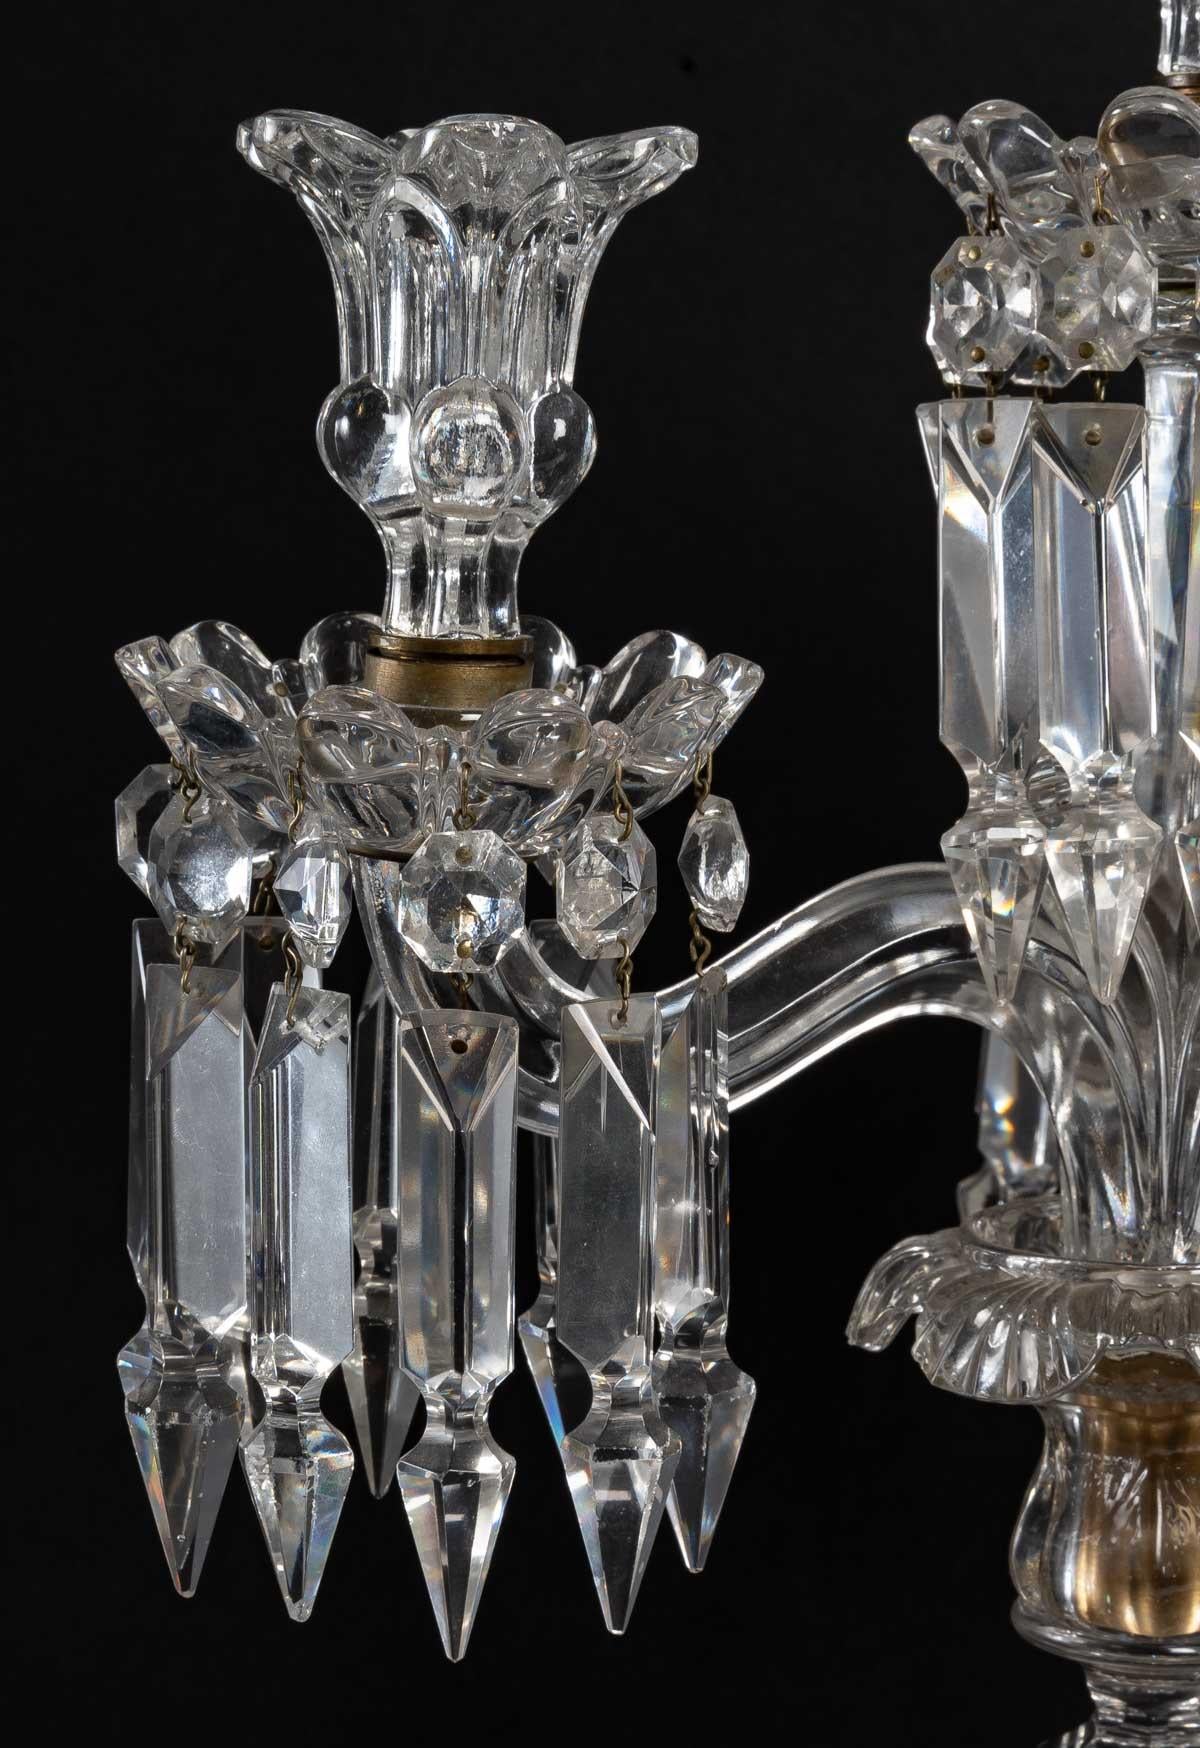 French Pair of Baccarat Crystal Candelabras, Early 20th Century